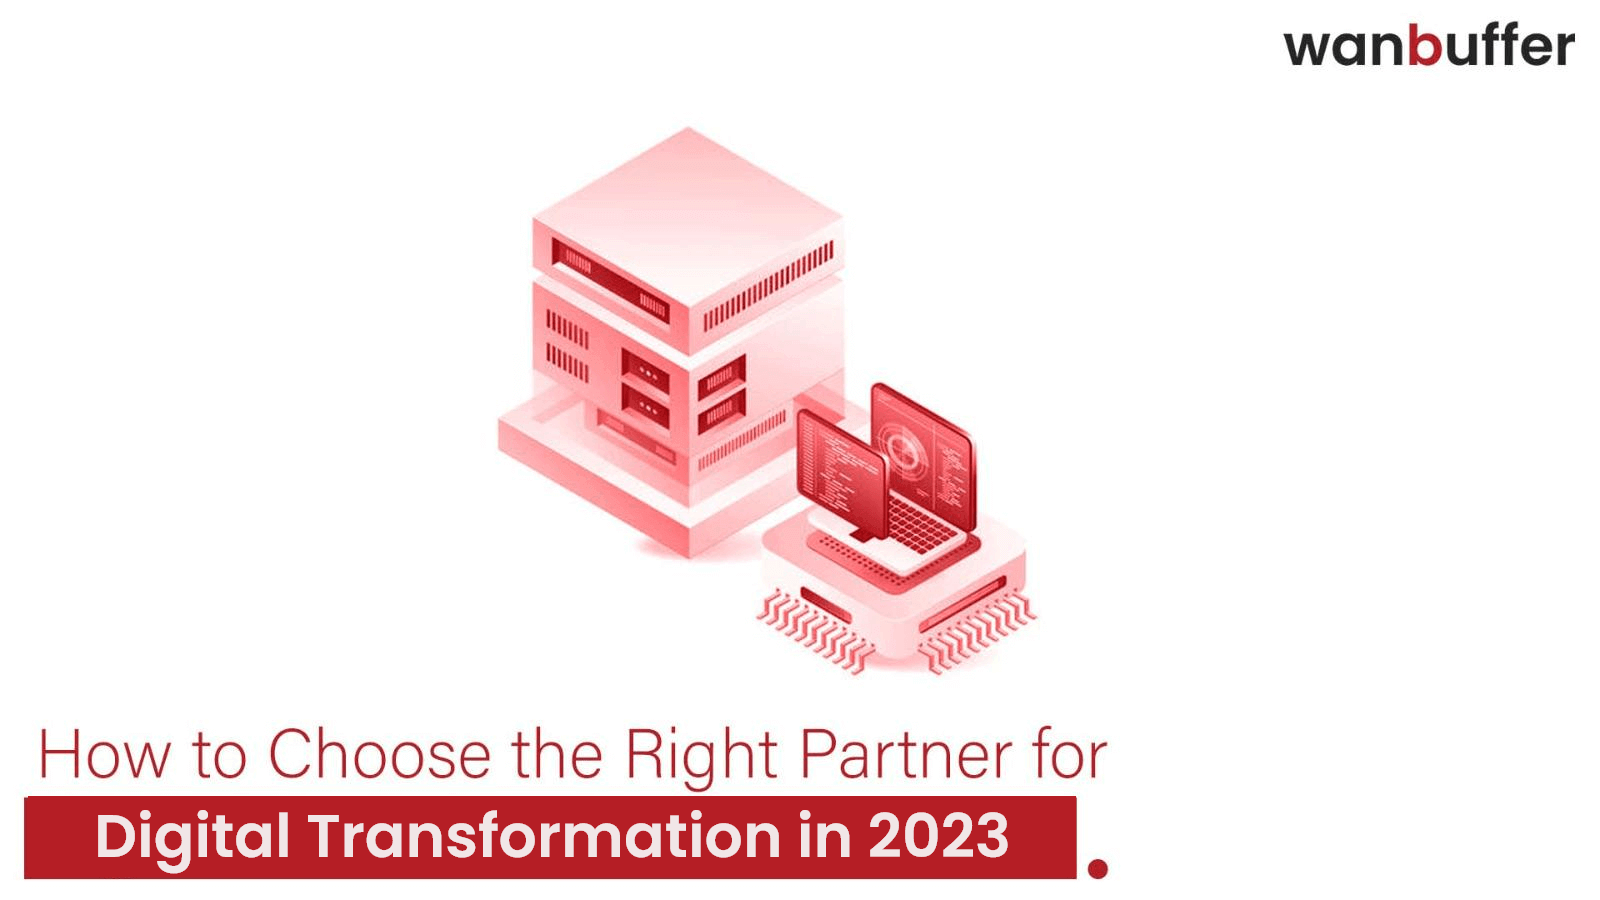 How to Pick the Best Partner in 2023 for Digital Transformation 